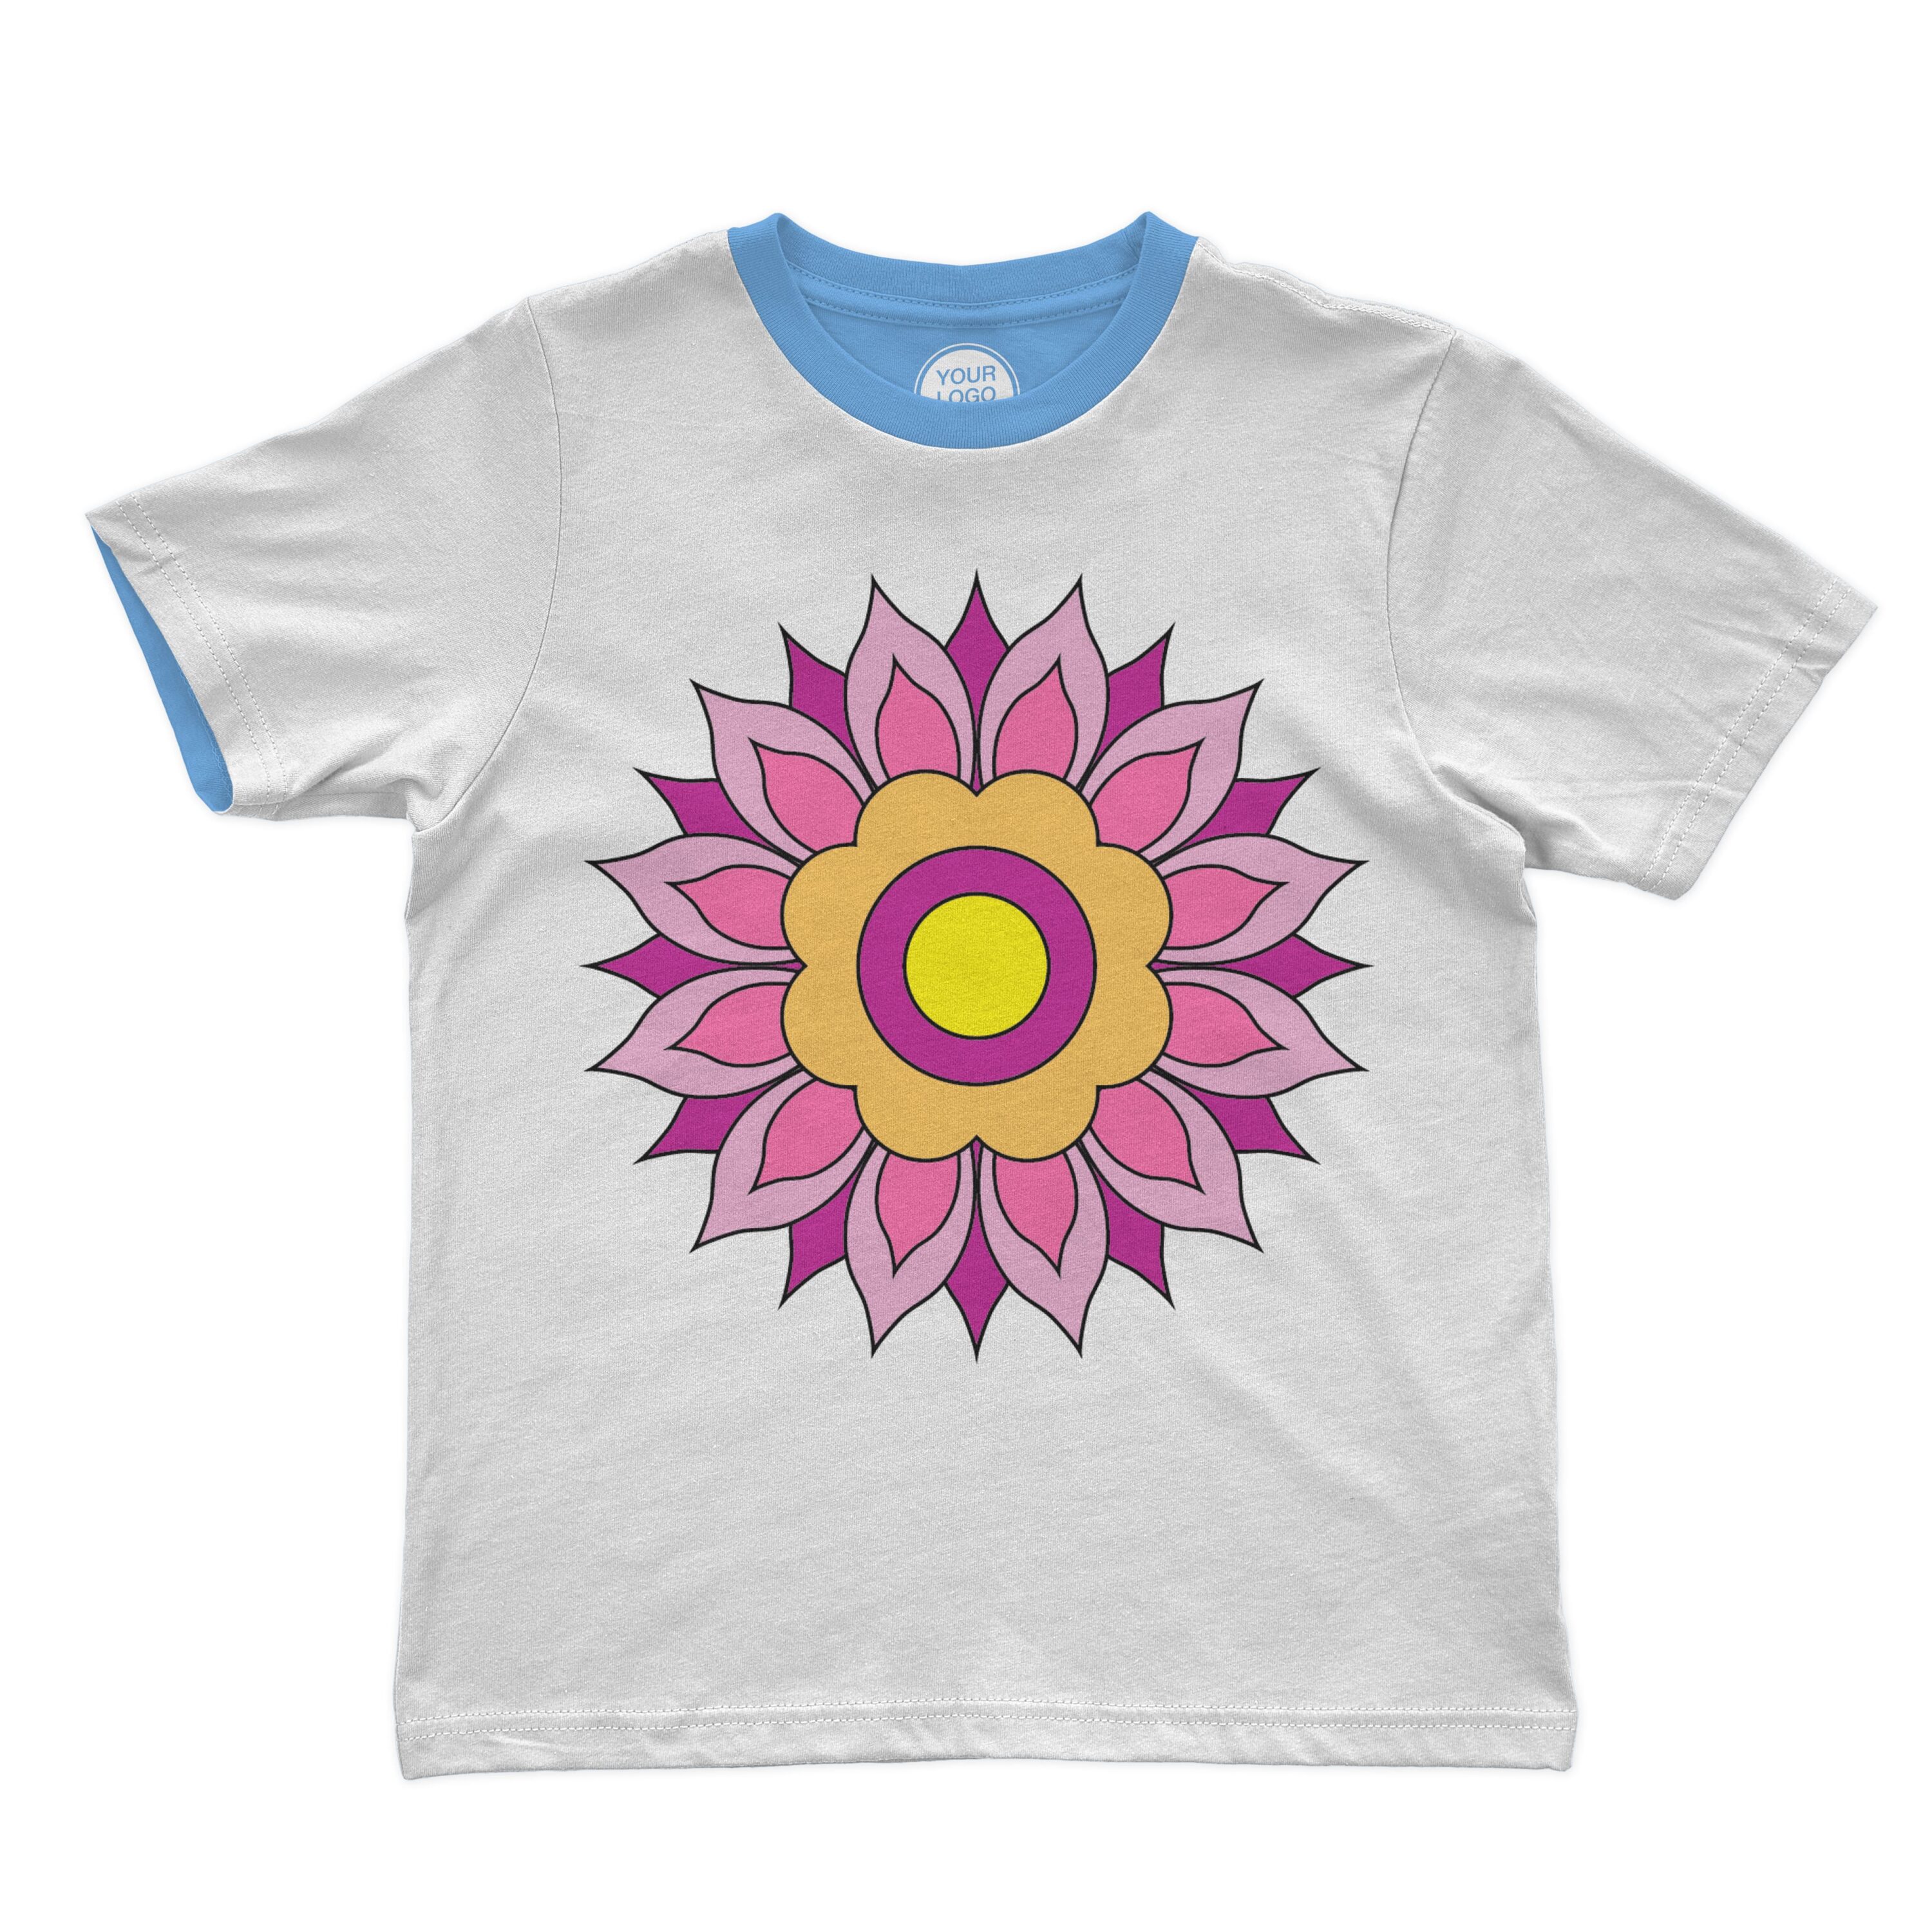 T-shirt design with beautiful pink flower.